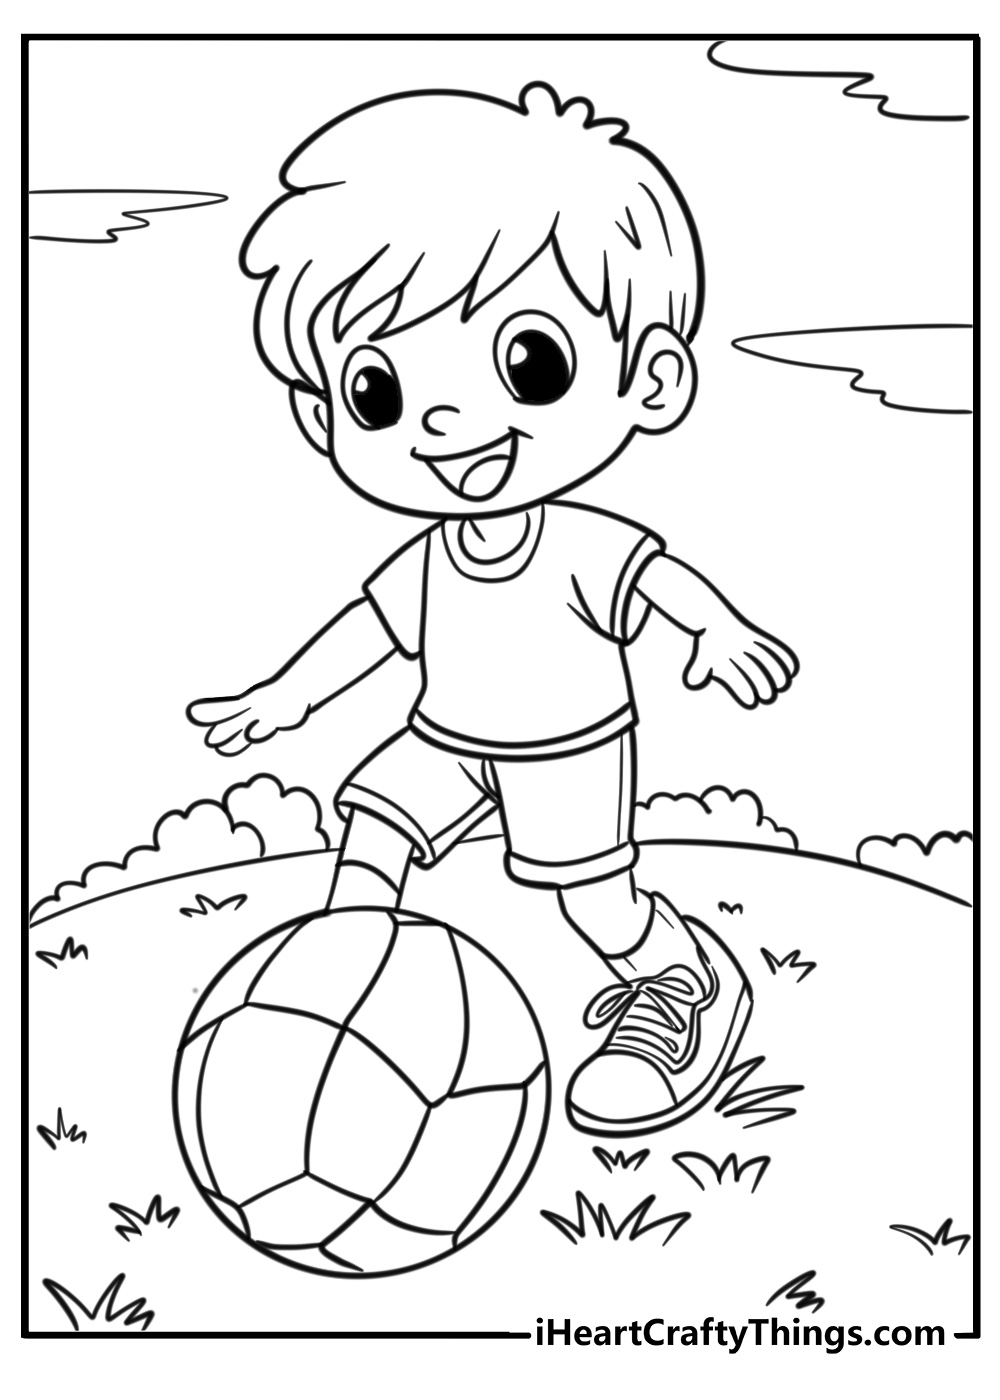 Happy boy playing with a ball coloring sheet